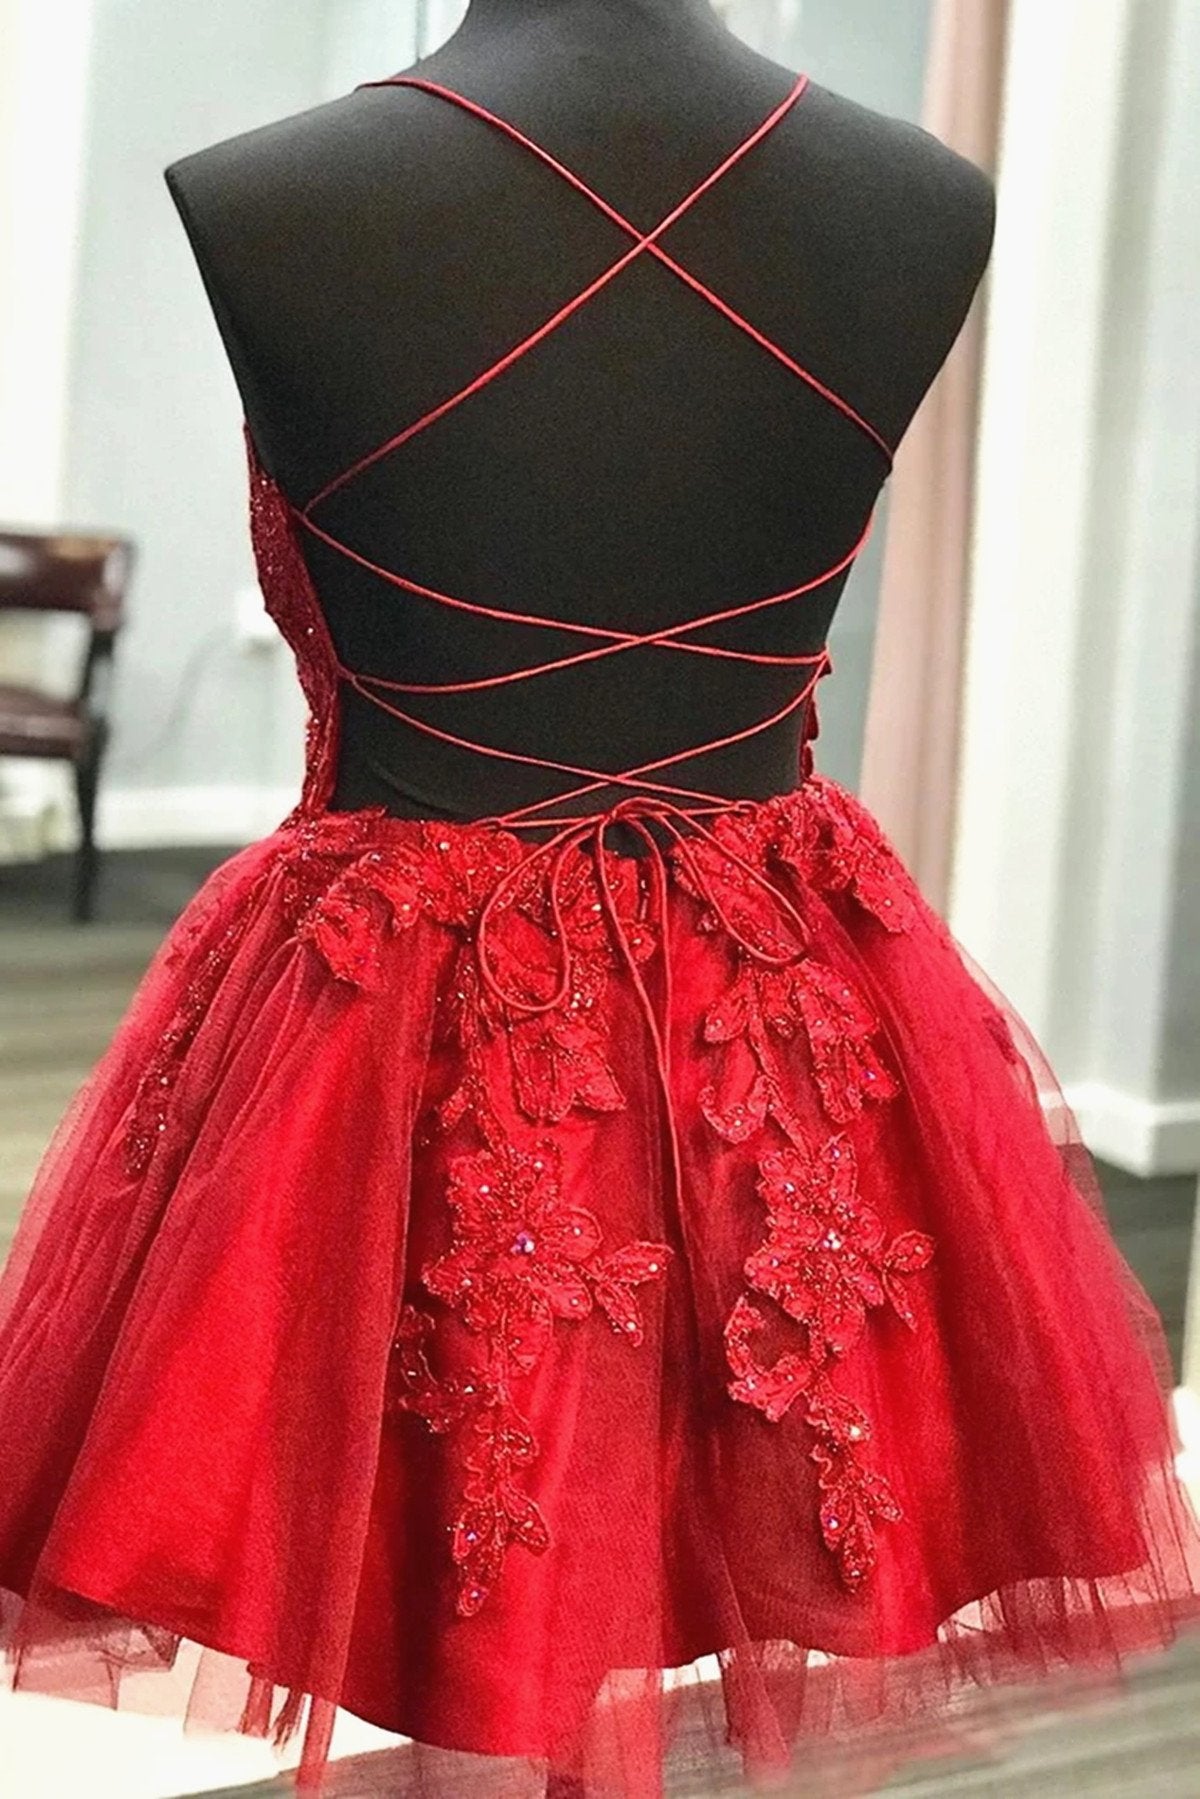 Party Dress Shops Near Me, A Line V Neck Short Backless Red Lace Prom Dresses, Short Red Backless Lace Formal Homecoming Dresses